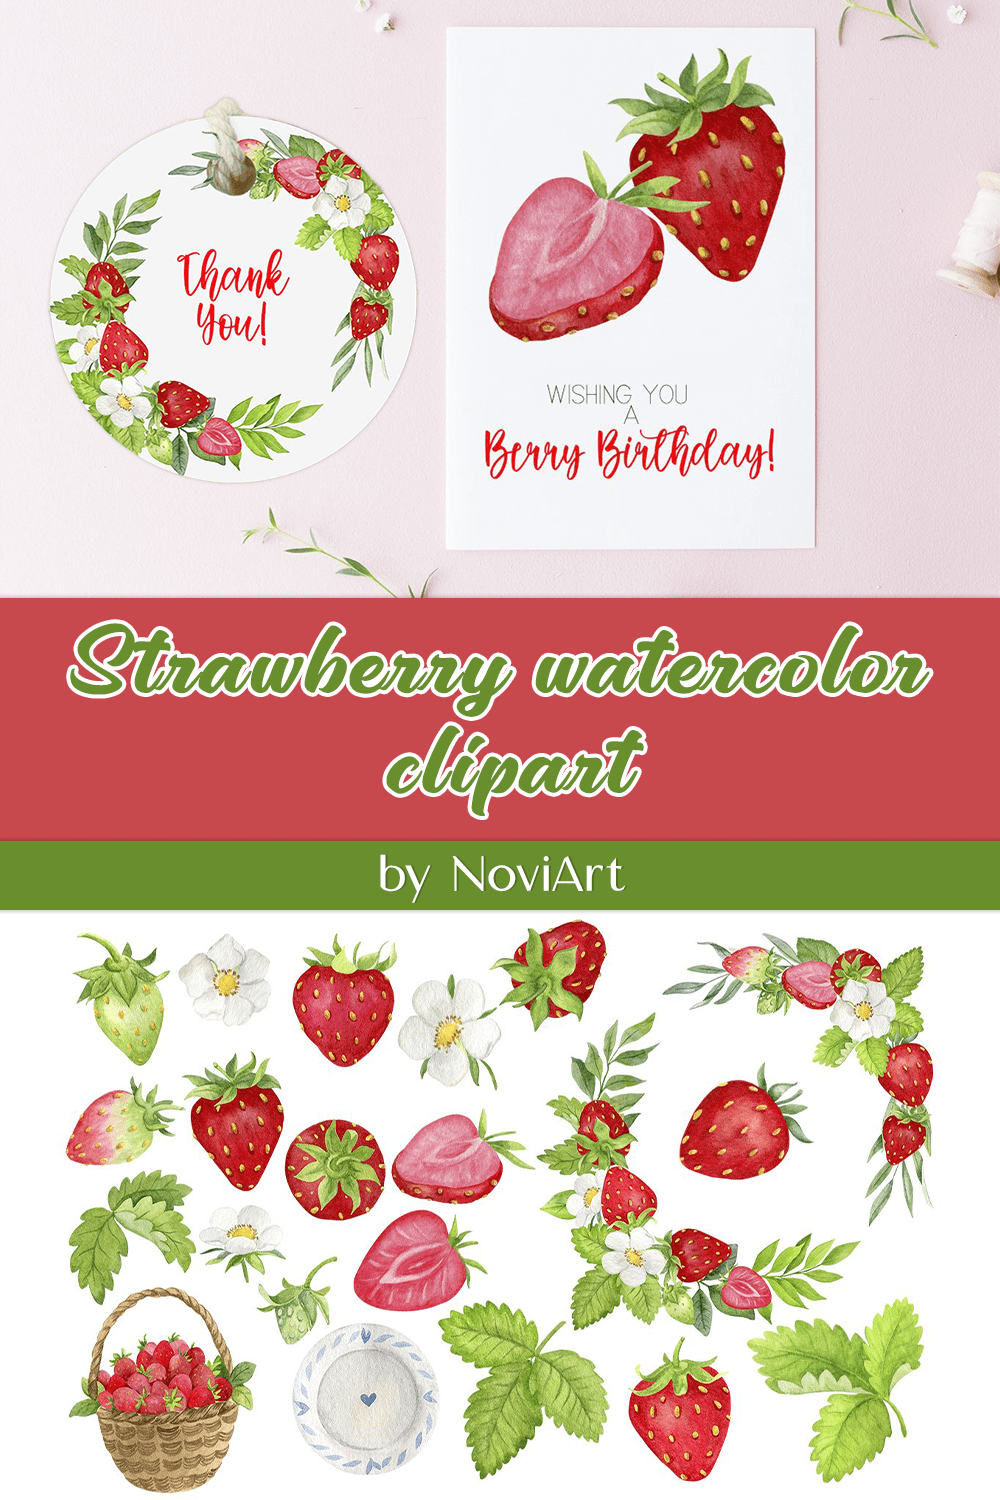 Strawberry Watercolor Clipart - Pinterest.